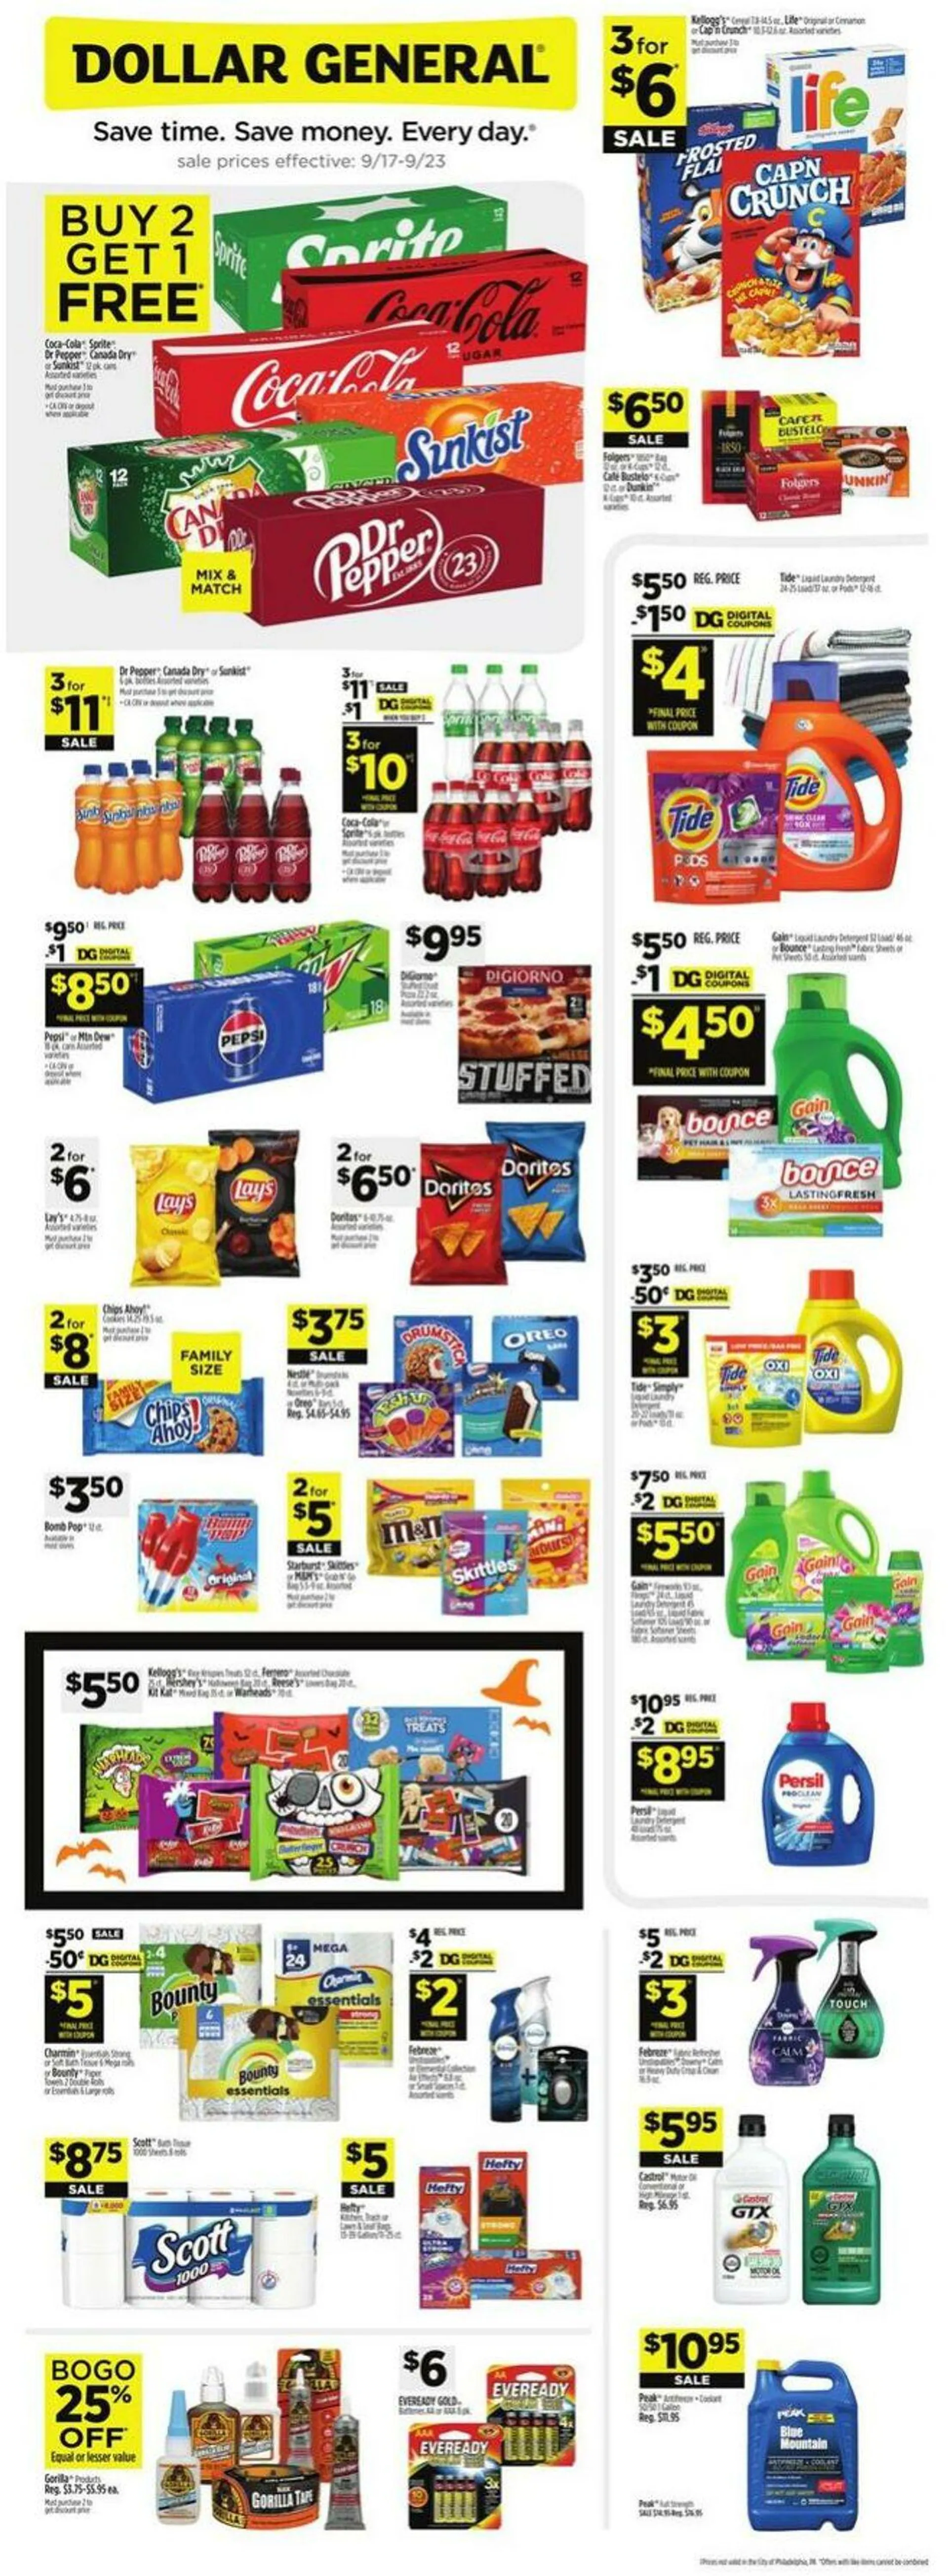 Dollar General Current weekly ad